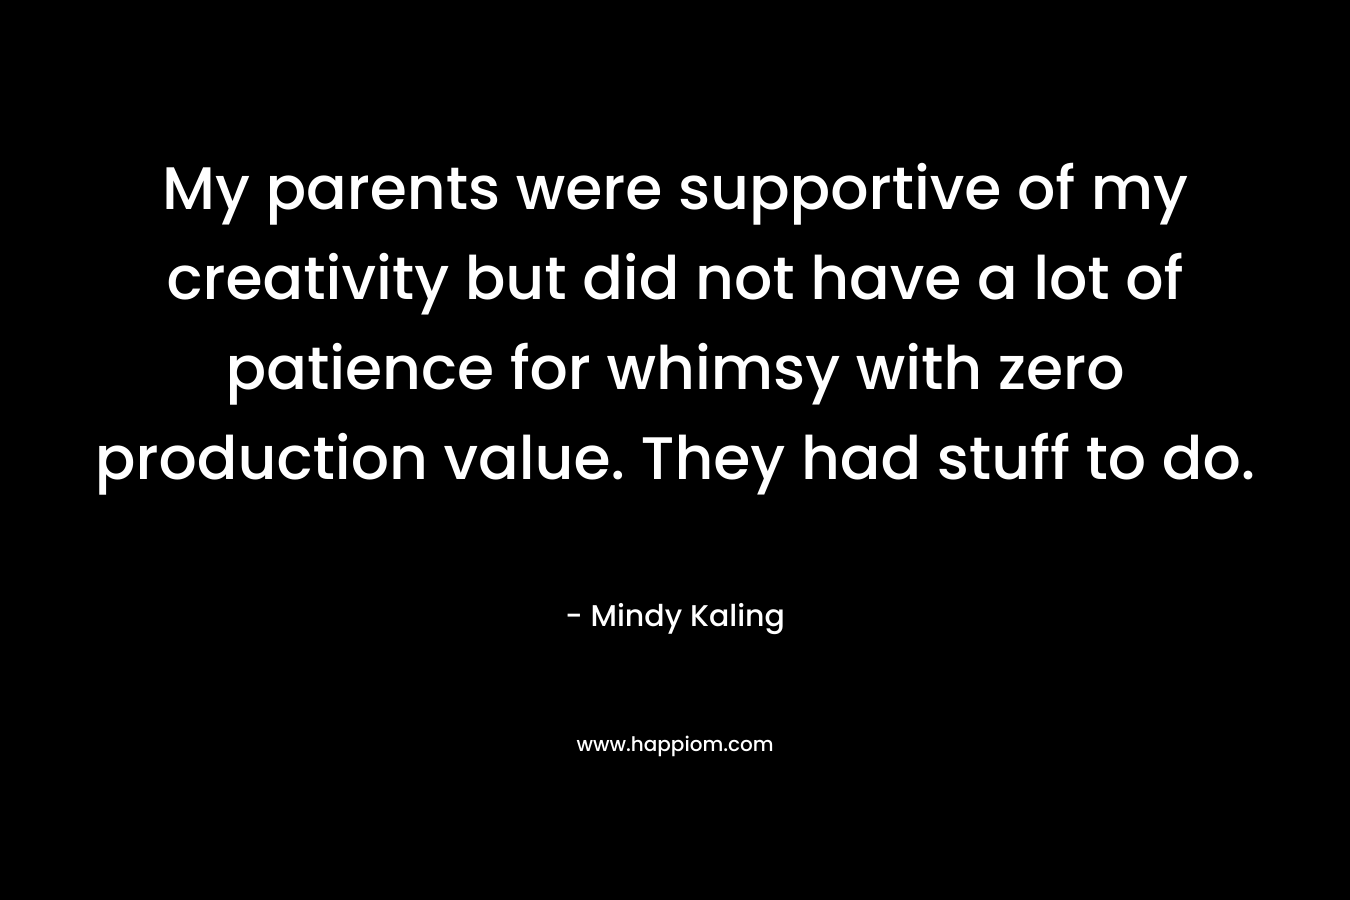 My parents were supportive of my creativity but did not have a lot of patience for whimsy with zero production value. They had stuff to do.